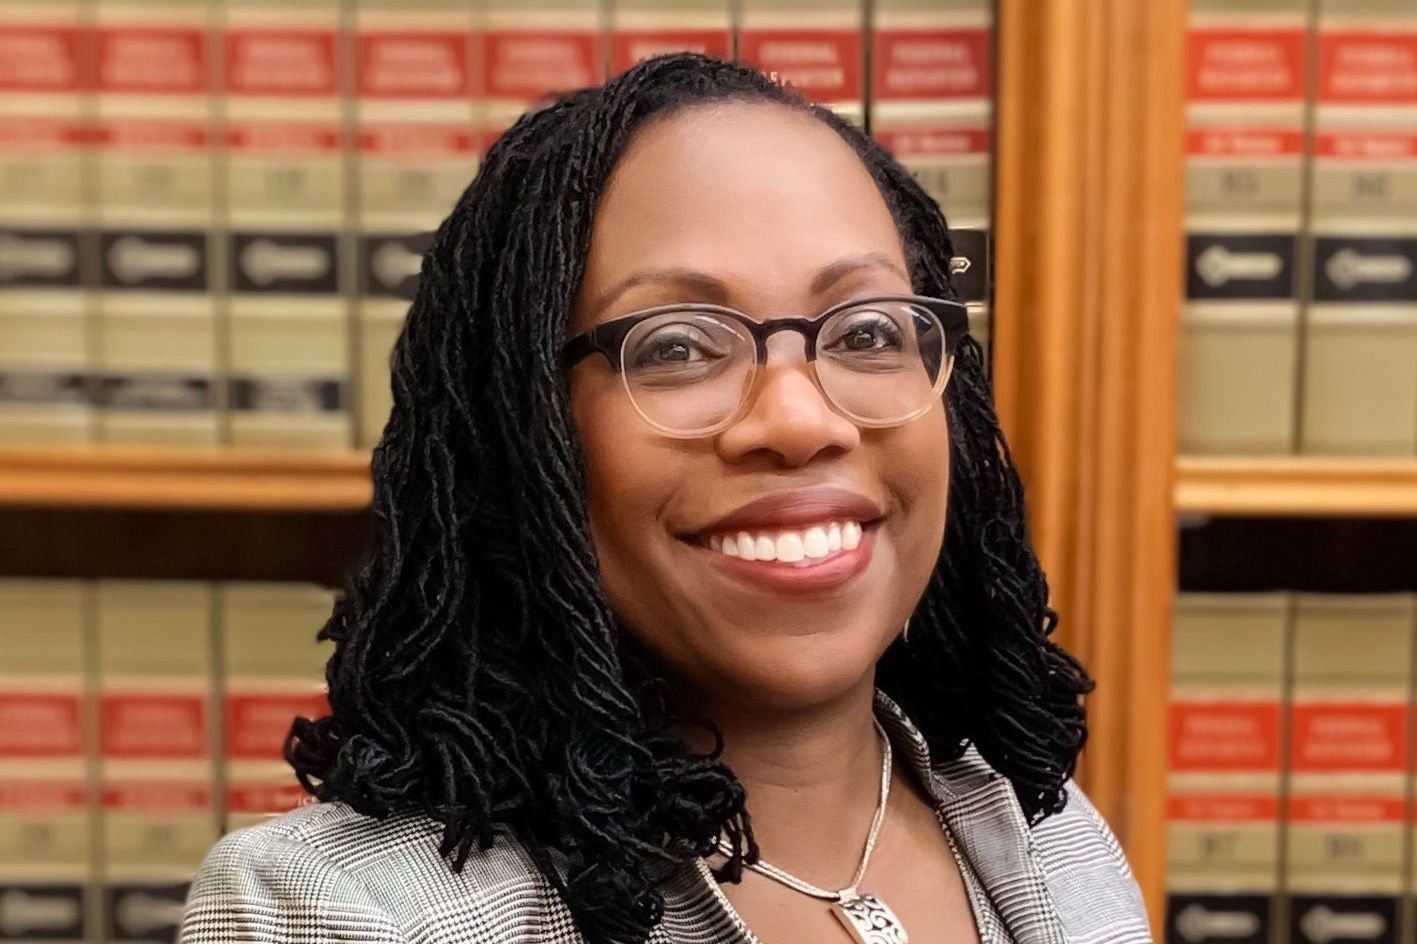 Ketanji Brown Jackson brings a new perspective to the Supreme Court